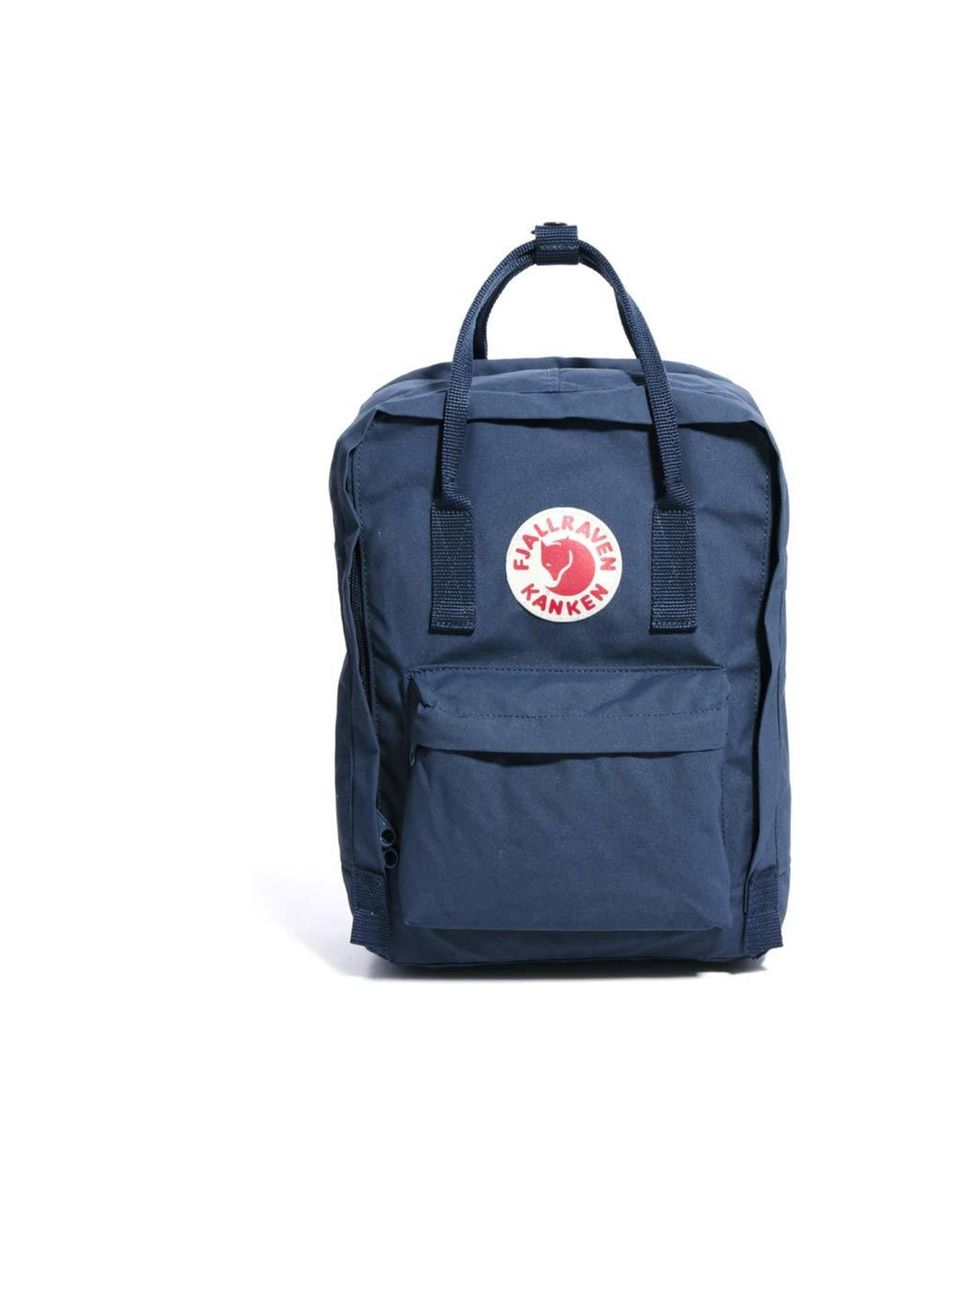 <p>Team this look with a back pack! We are big fans of the Fajallraven ones. They come in all sizes and different colours.</p><p>This one is available at <a href="www.asos.com/Fjallraven/Fjallraven-Kanken-Laptop-Backpack/Prod/pgeproduct.aspx?iid=3018261&a